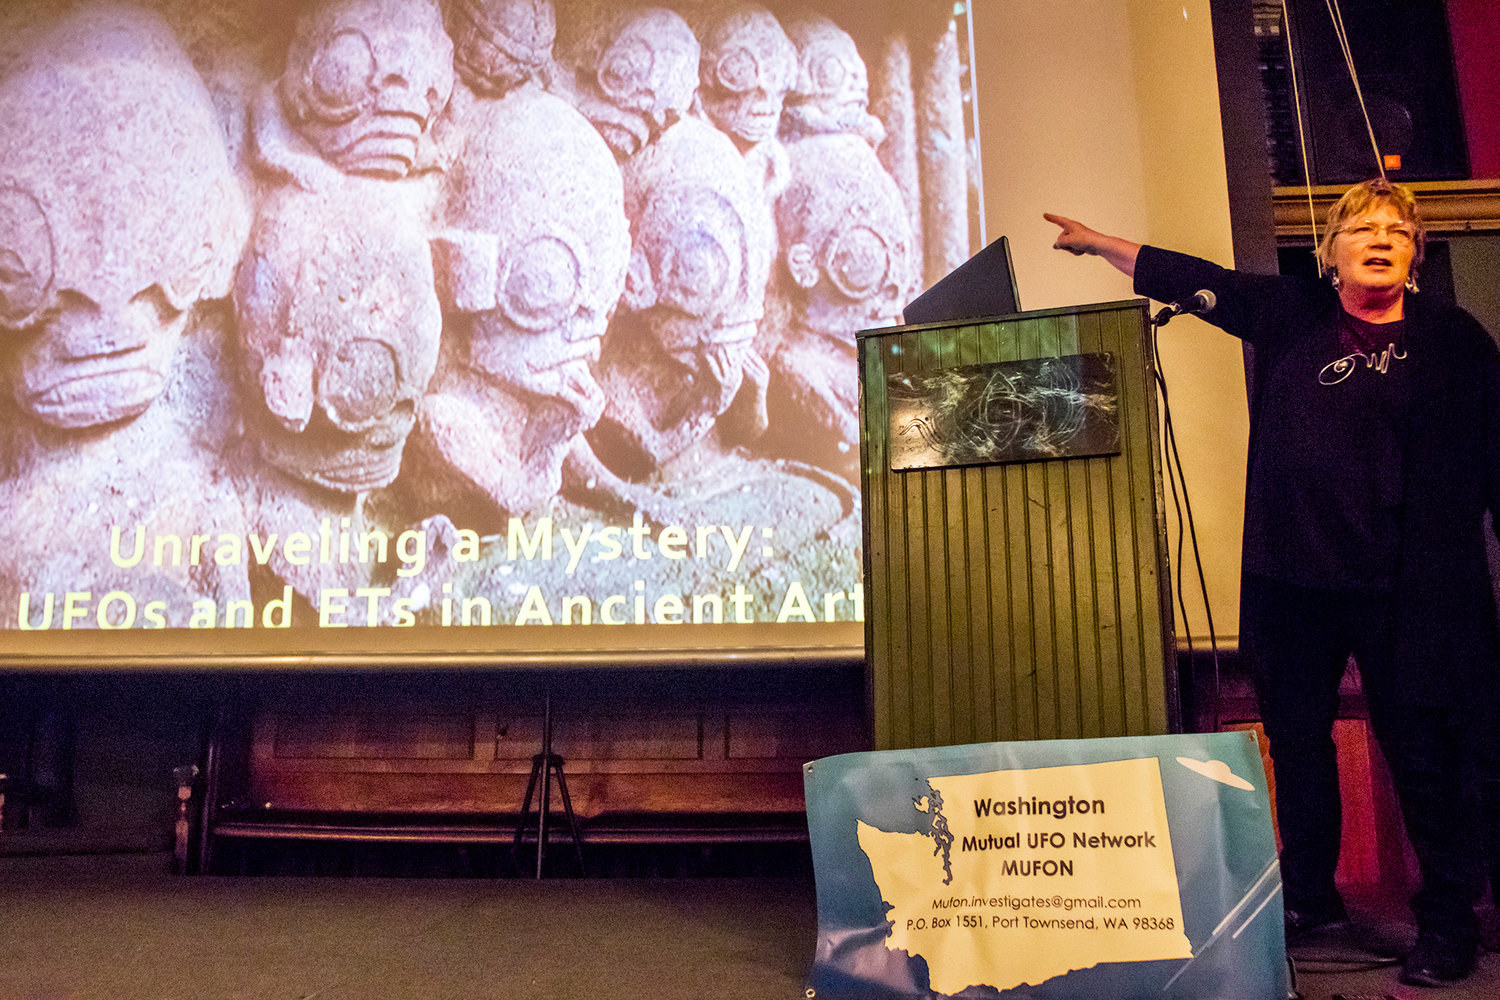 Maurene Morgan, the Washington State Mutual UFO Network (MUFON) State Section Director, talks about ancient artifacts found around the world that are believe to be linked with alien contact, during the "Unraveling A Mystery: UFOs and ETs in Ancient Art" showcase during Tuesday night History Pub at McMenamins Olympic Club.